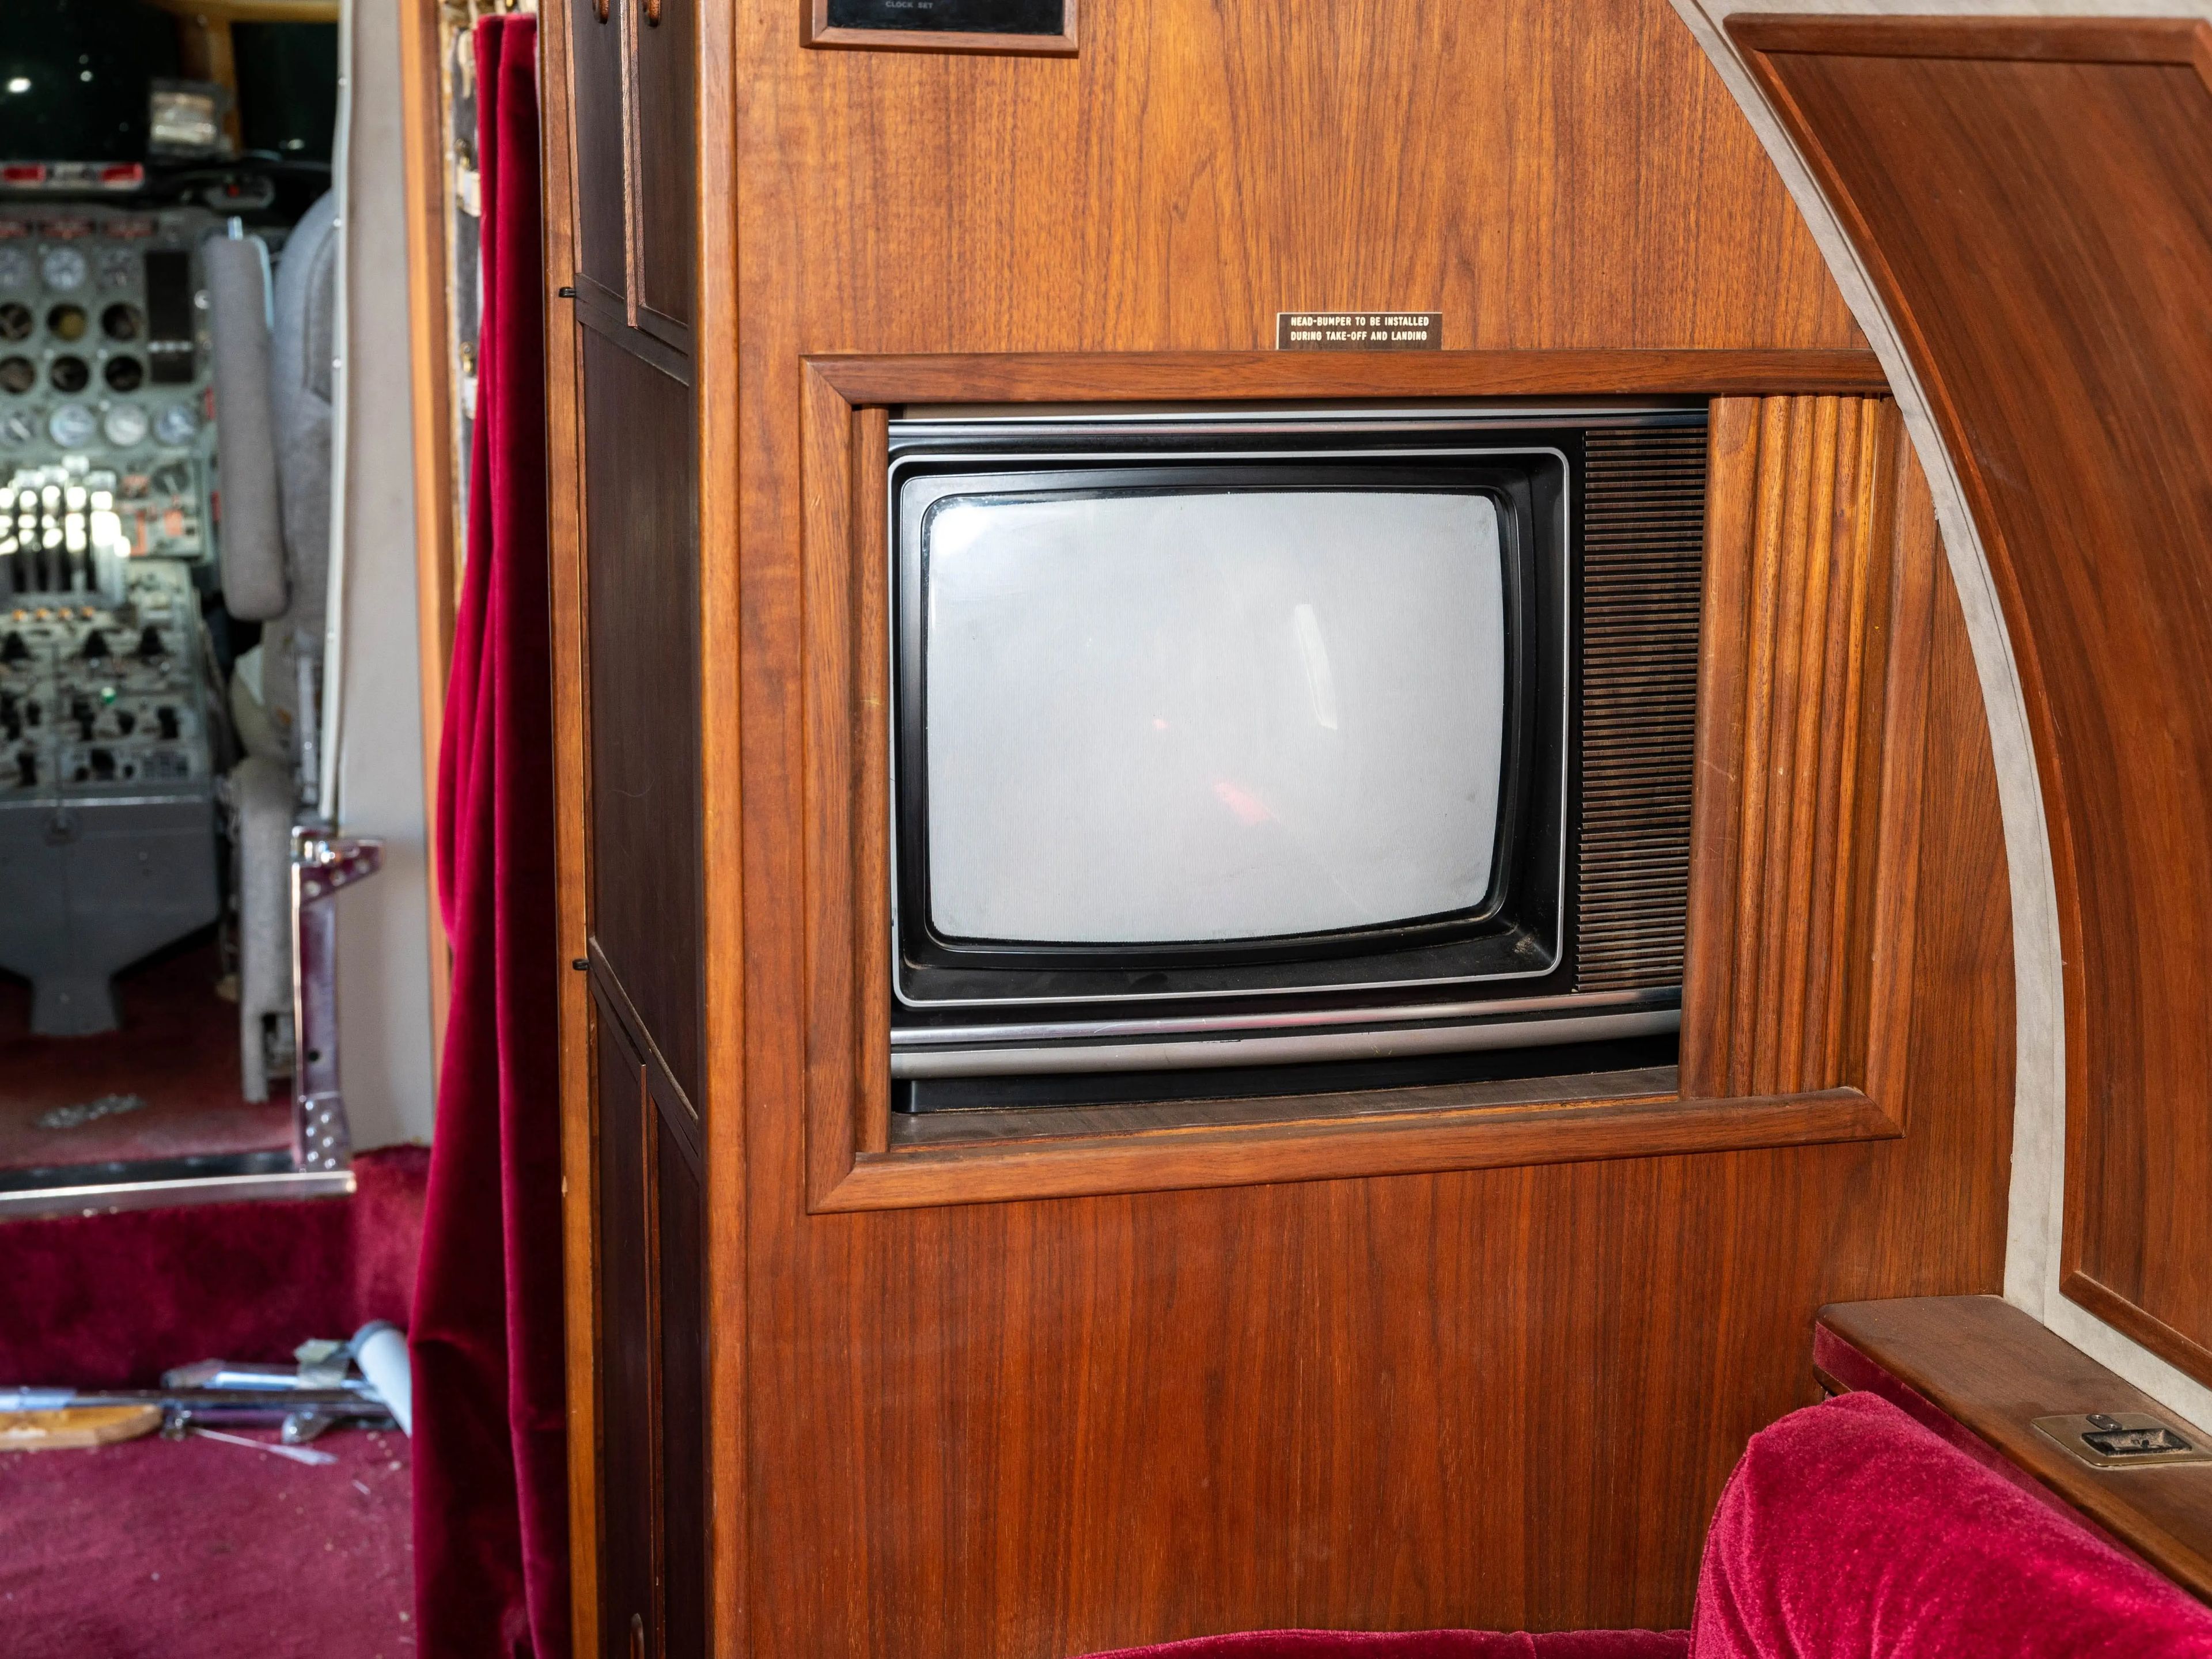 Photo of a TV inside a wooden cabinet on the private jet